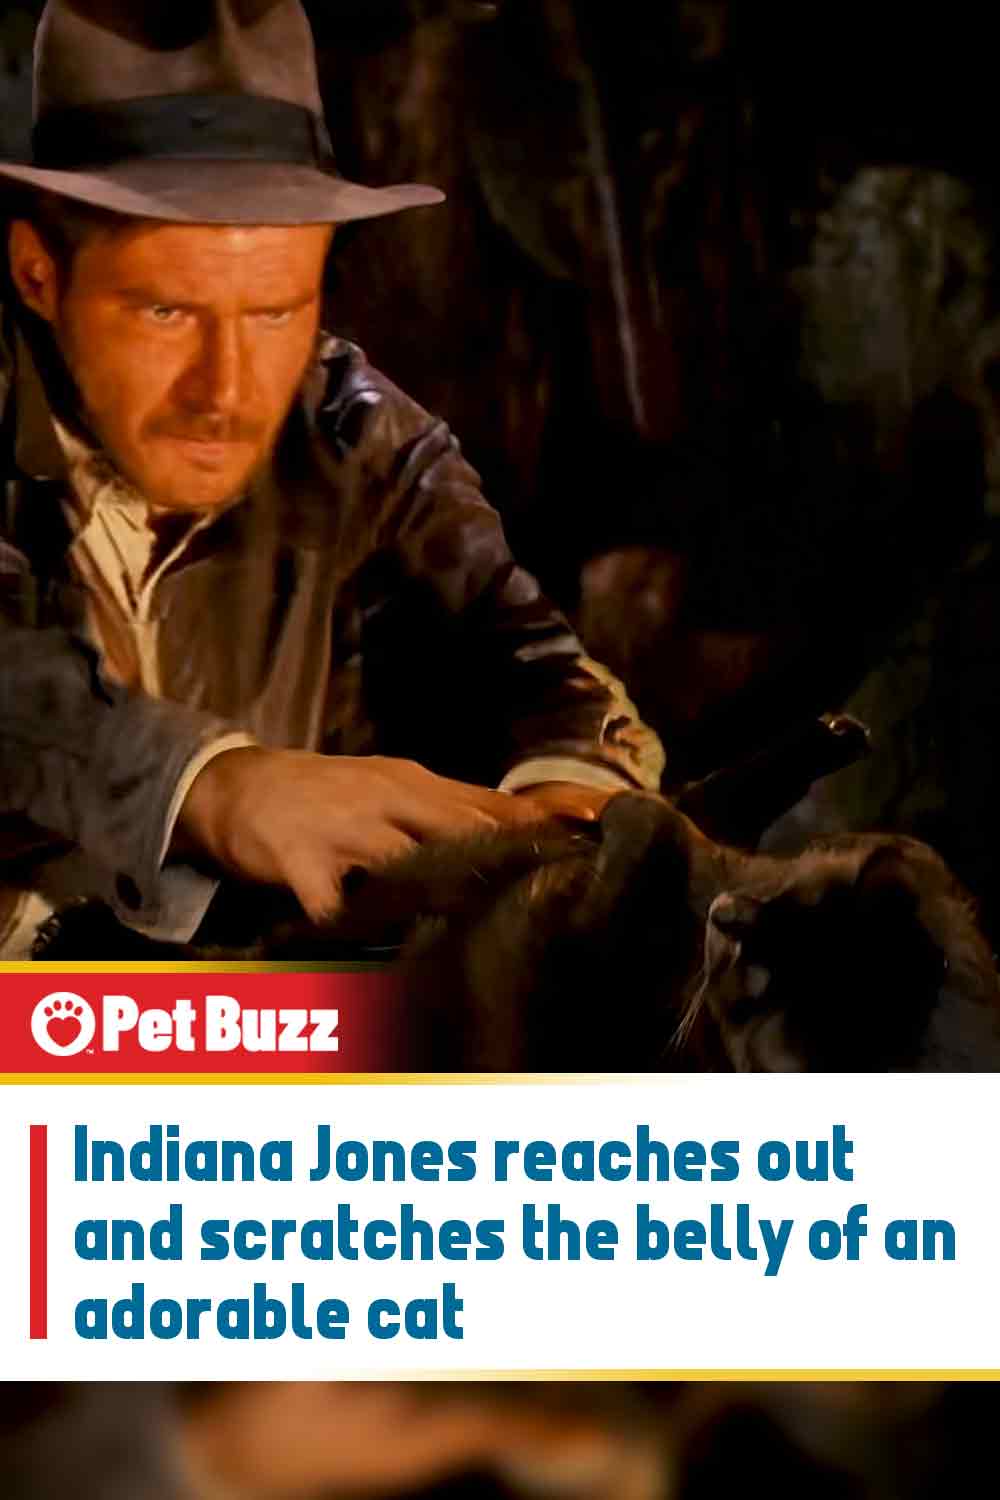 Indiana Jones reaches out and scratches the belly of an adorable cat